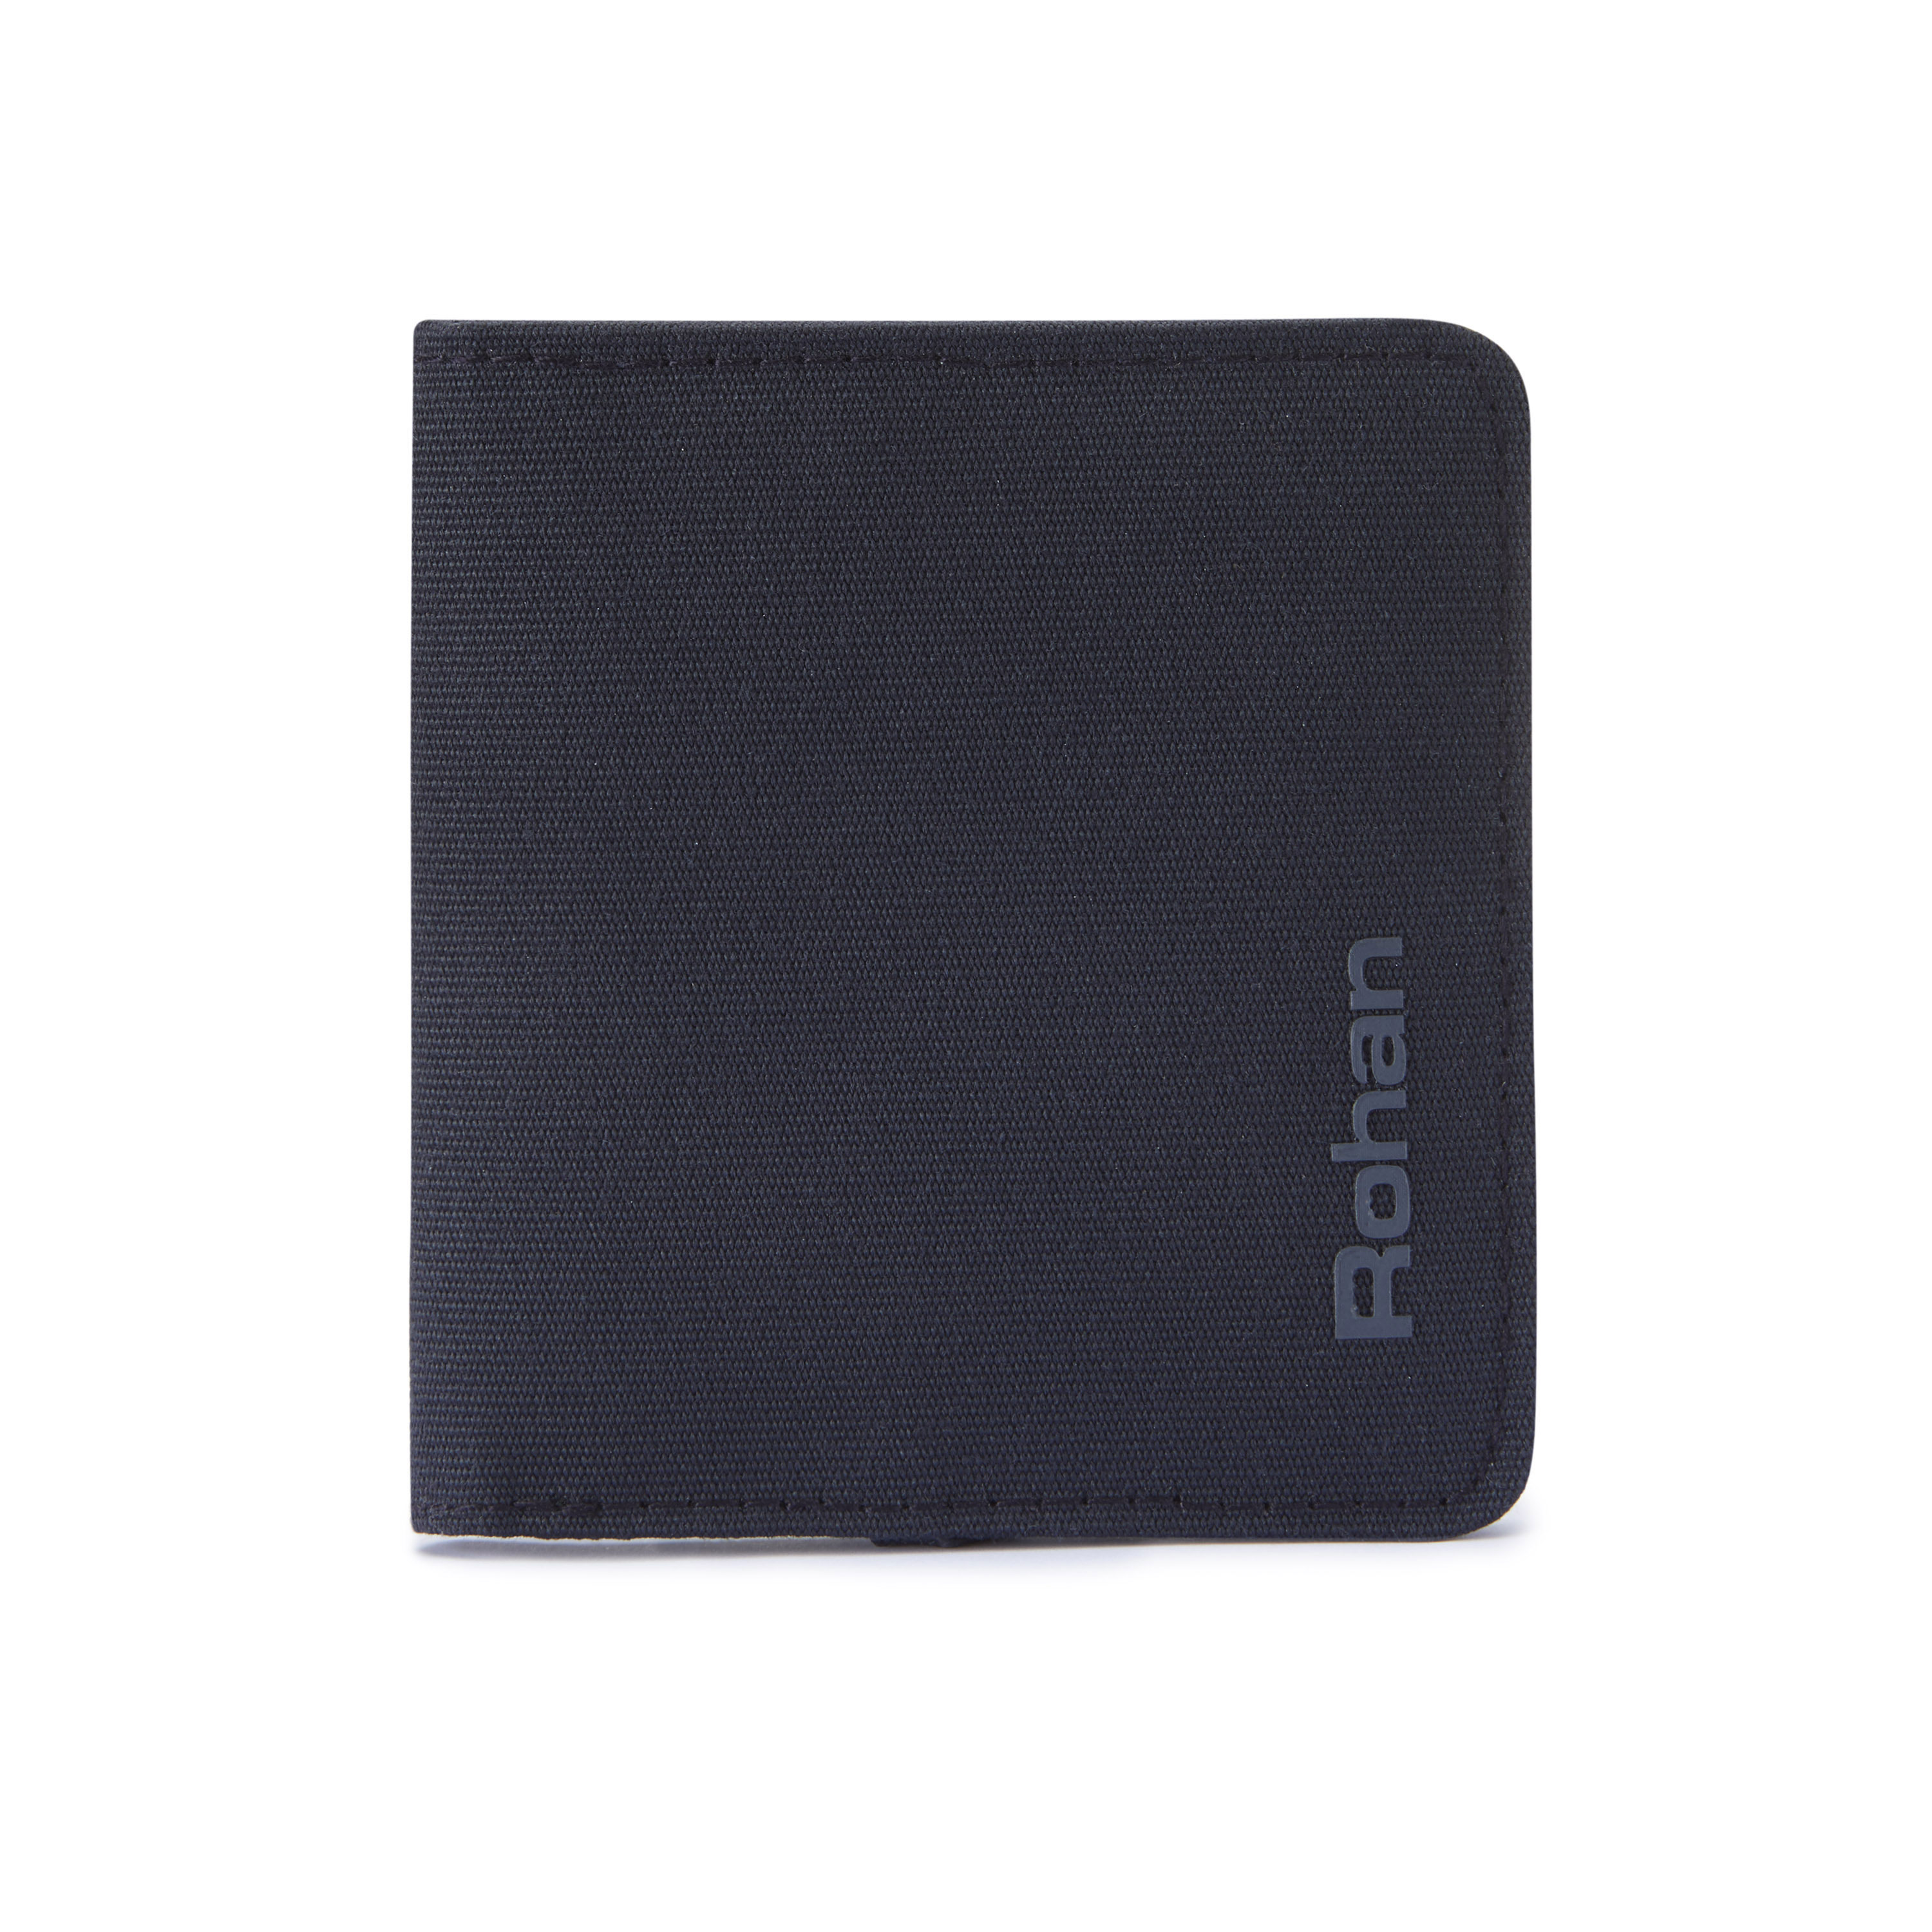 RFID Protected Compact Wallet